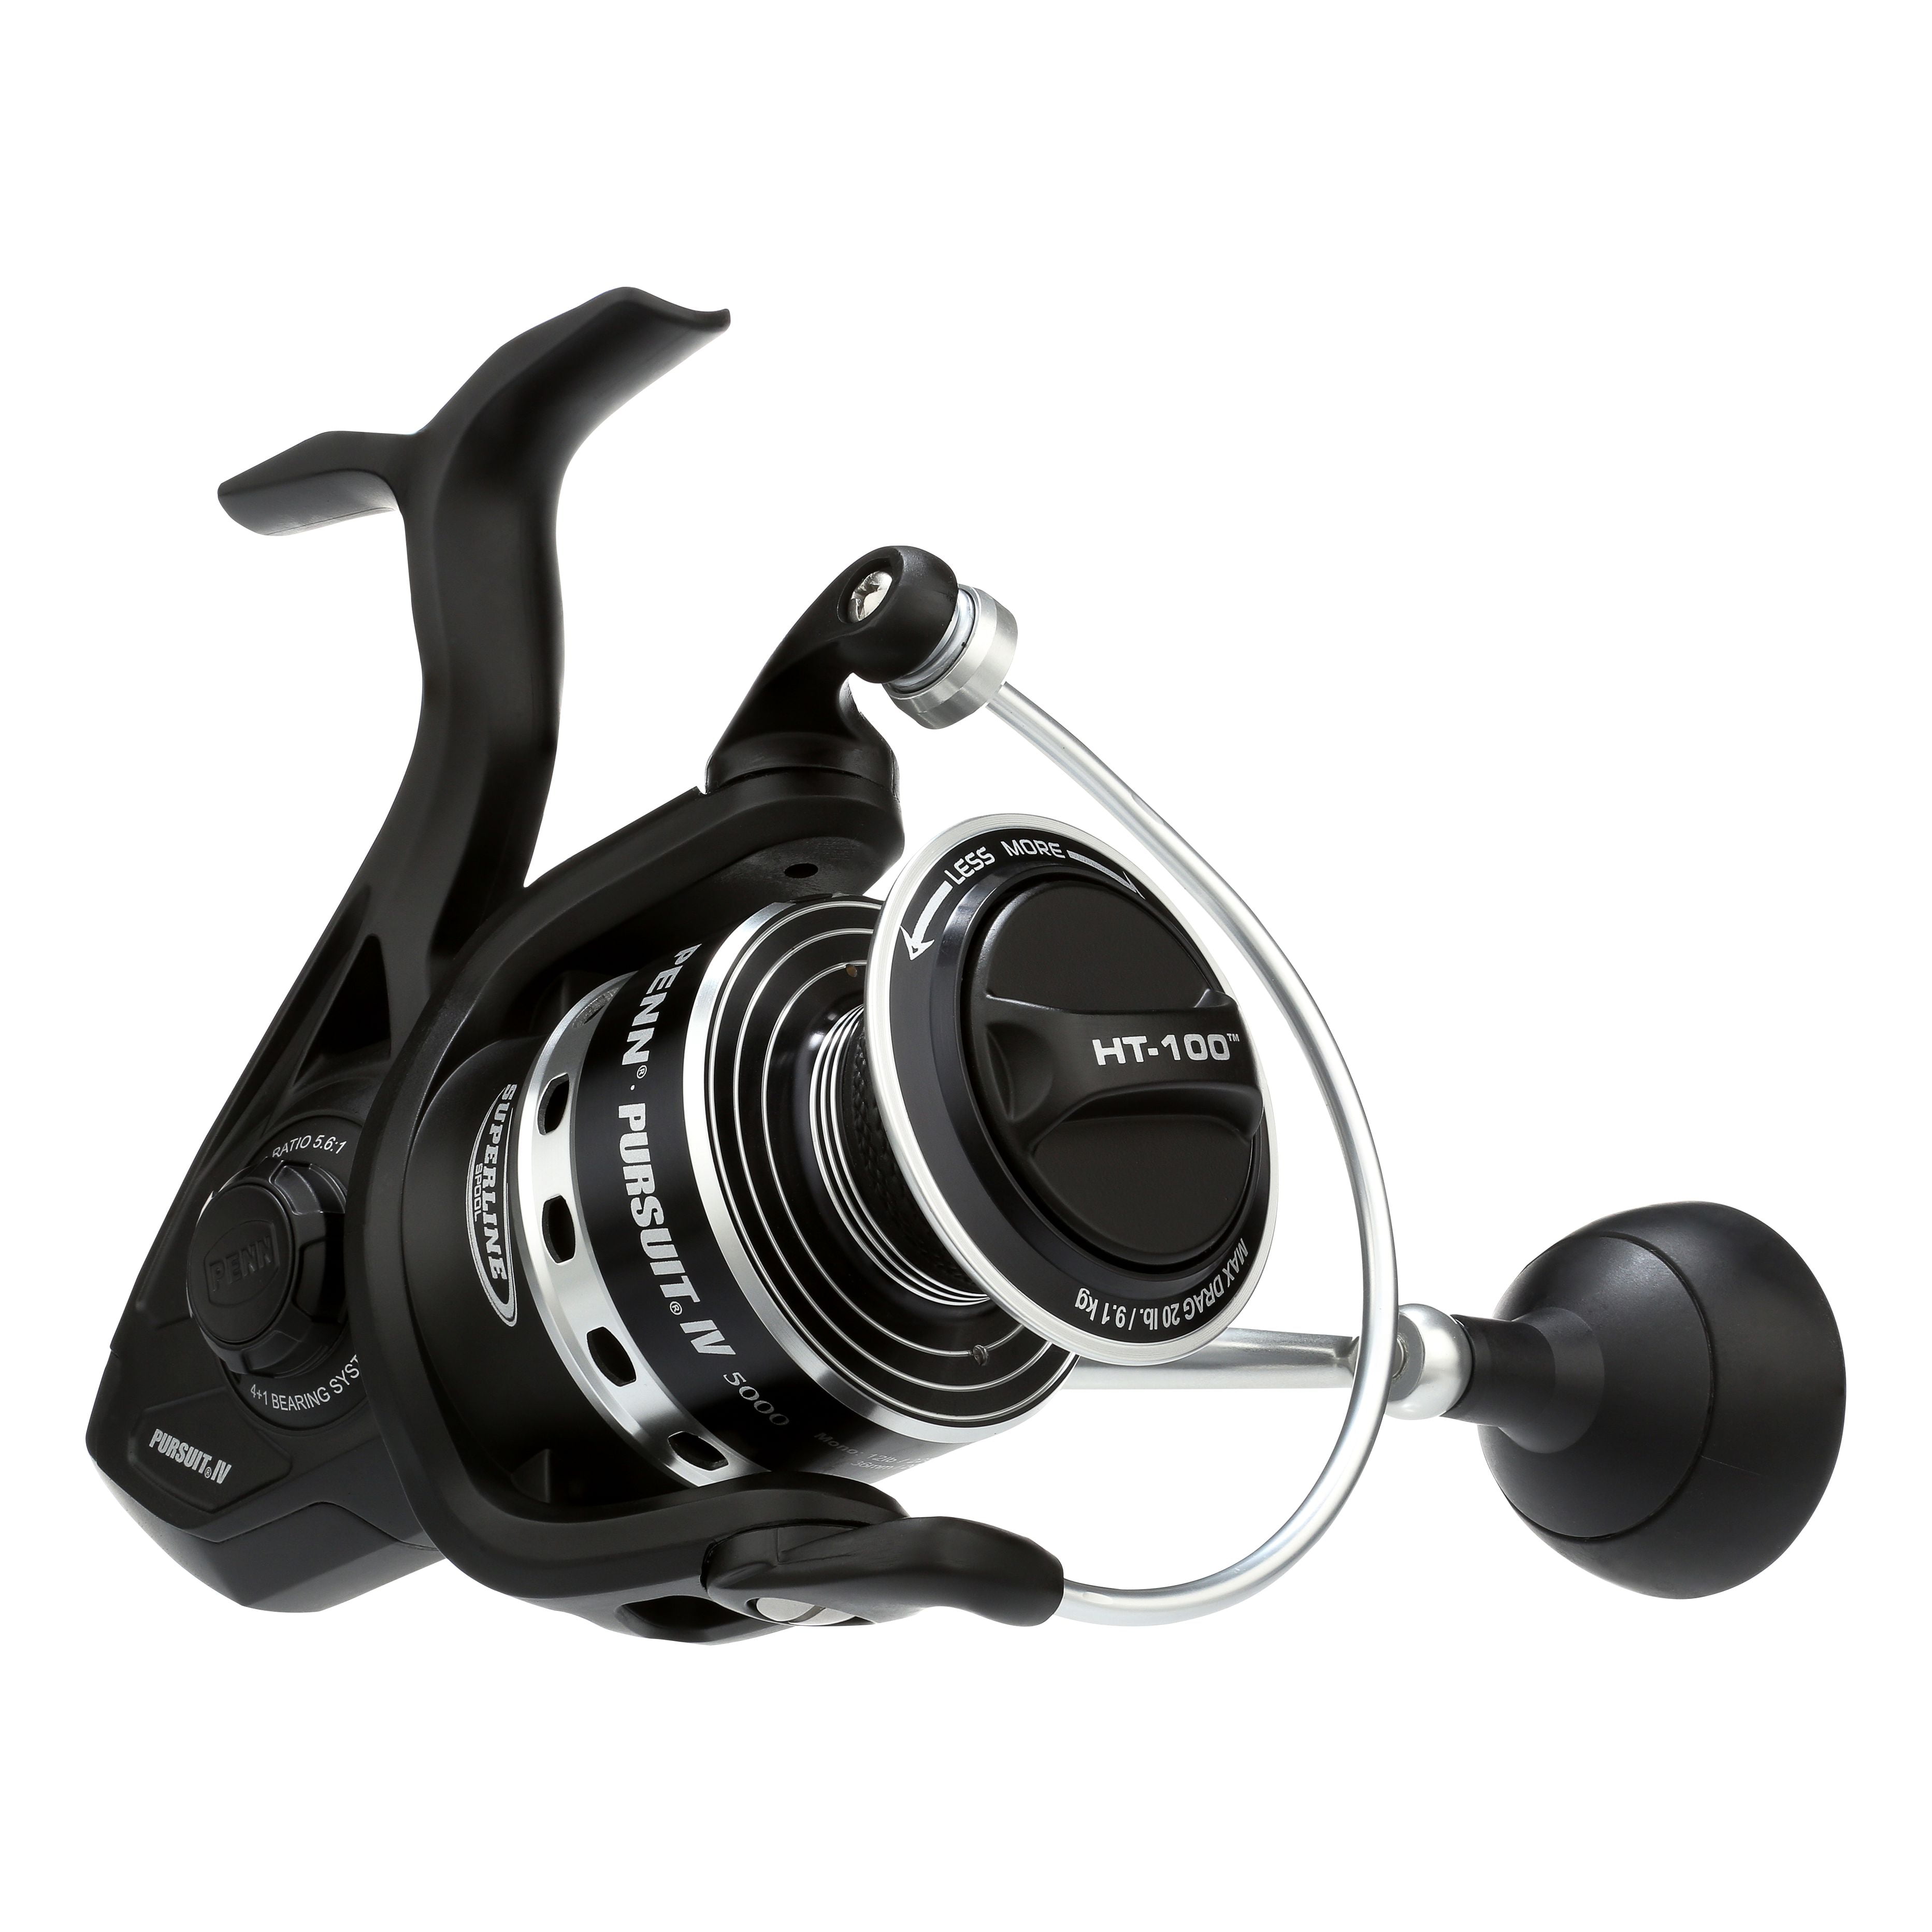 PENN Pursuit IV Spinning Reel Kit, Size 4000, Includes Reel Cover 